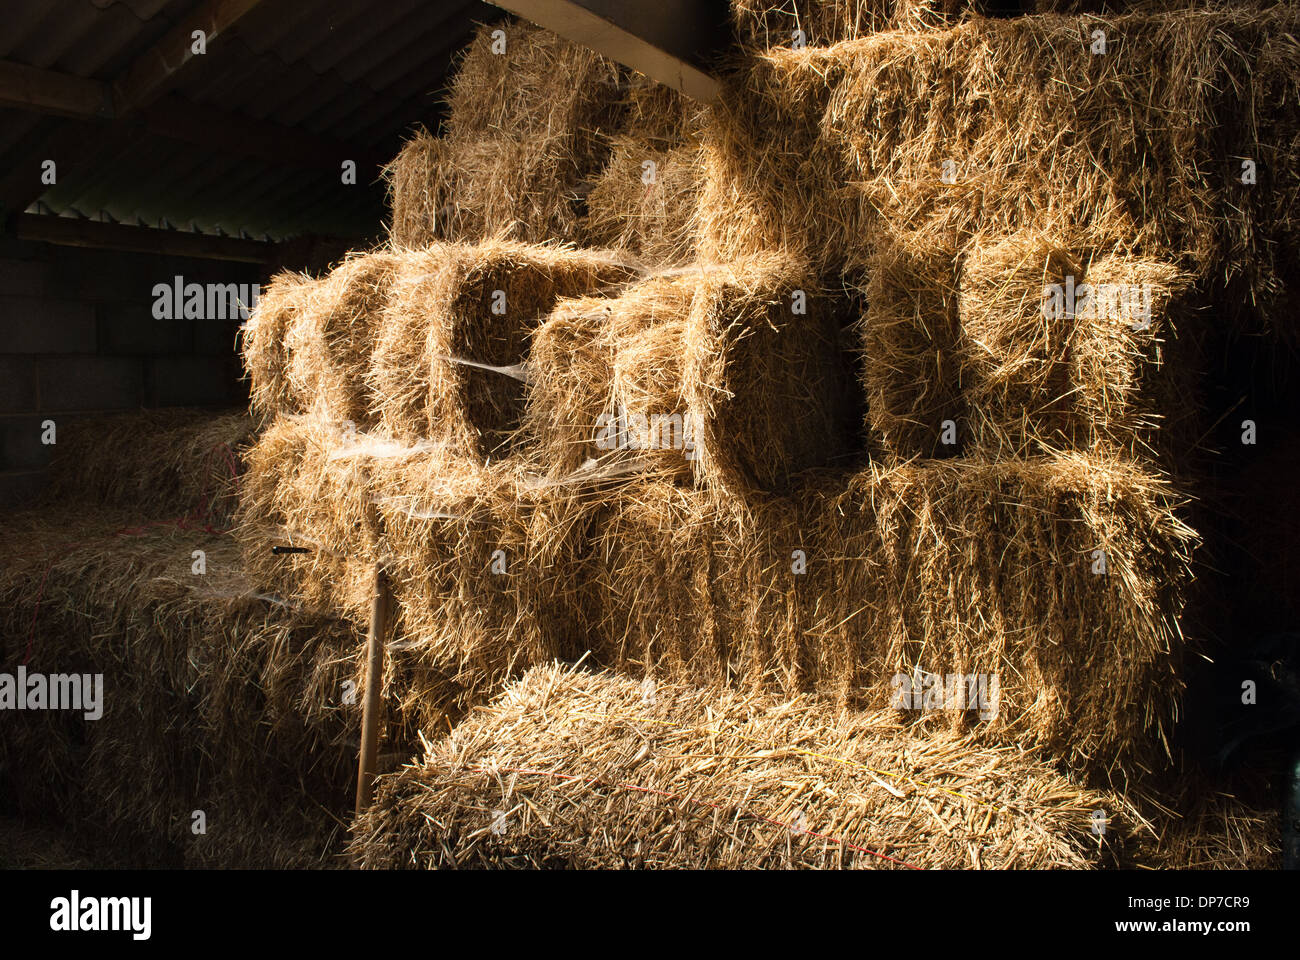 Hay Bales In A Barn Stock Photo Alamy